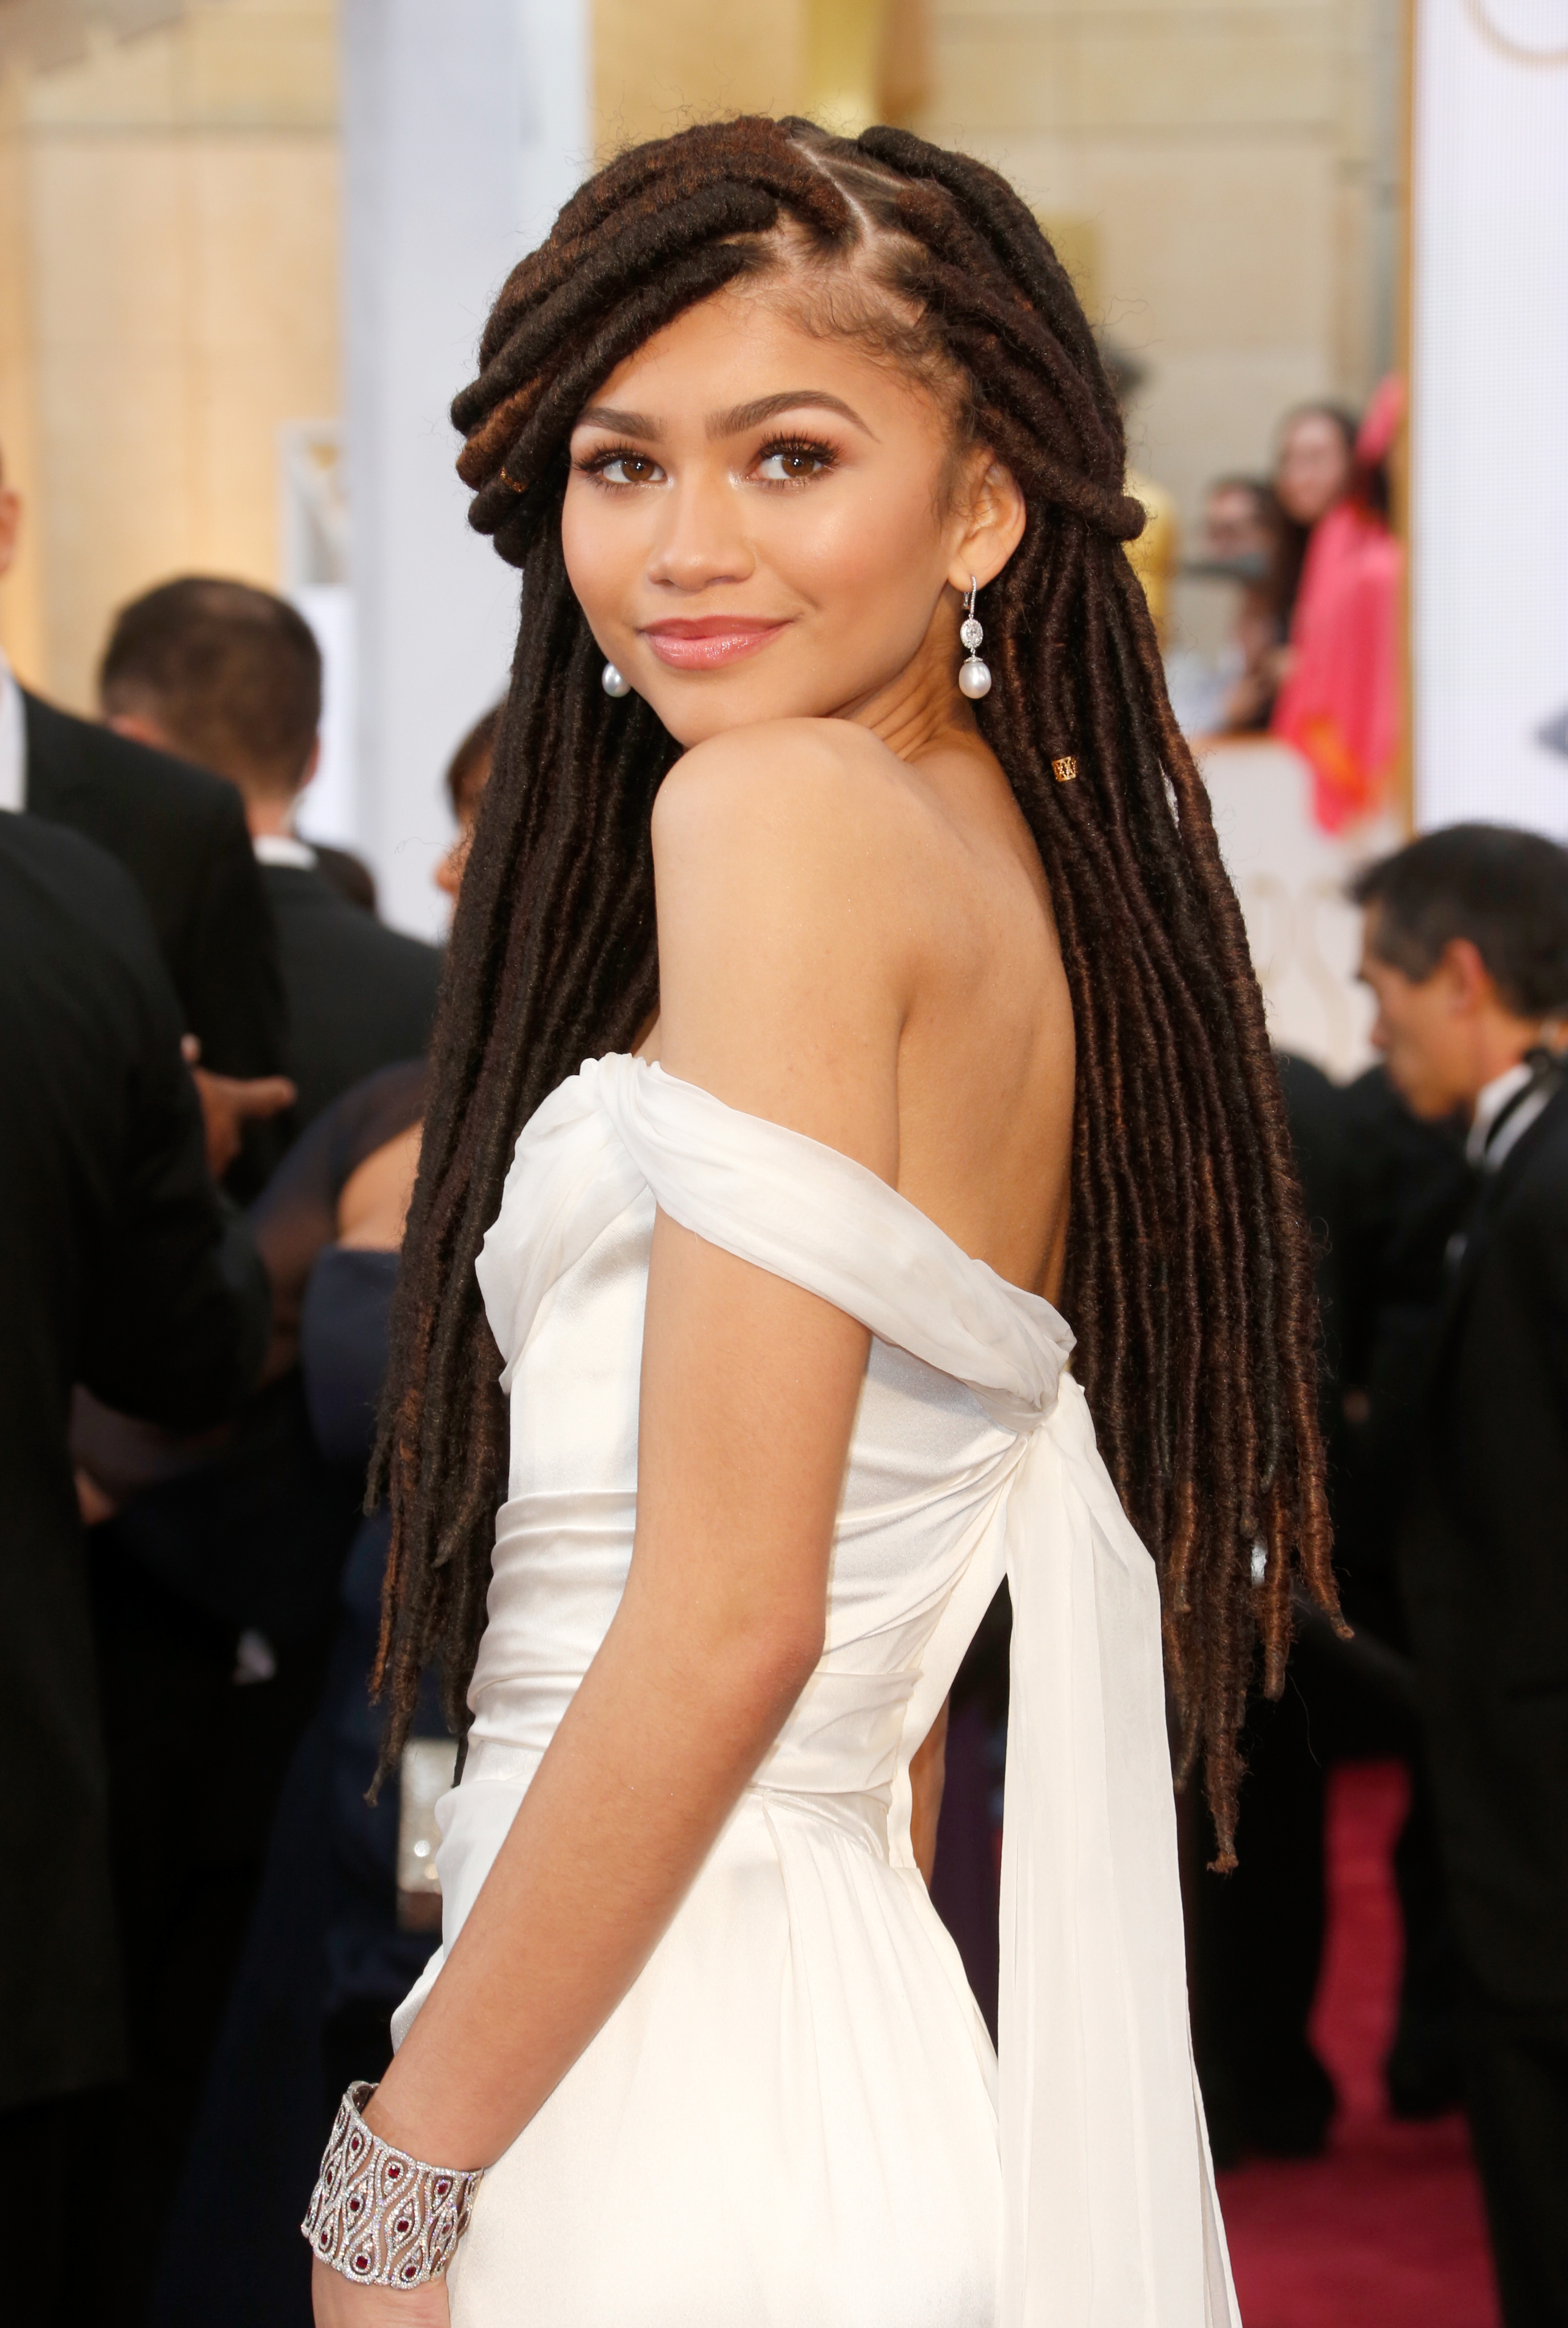 Zendaya arrives in Chopard to the 87th Annual Academy Awards at Hollywood & Highland Center in Hollywood, California, on February 22, 2015. | Source: Getty Images